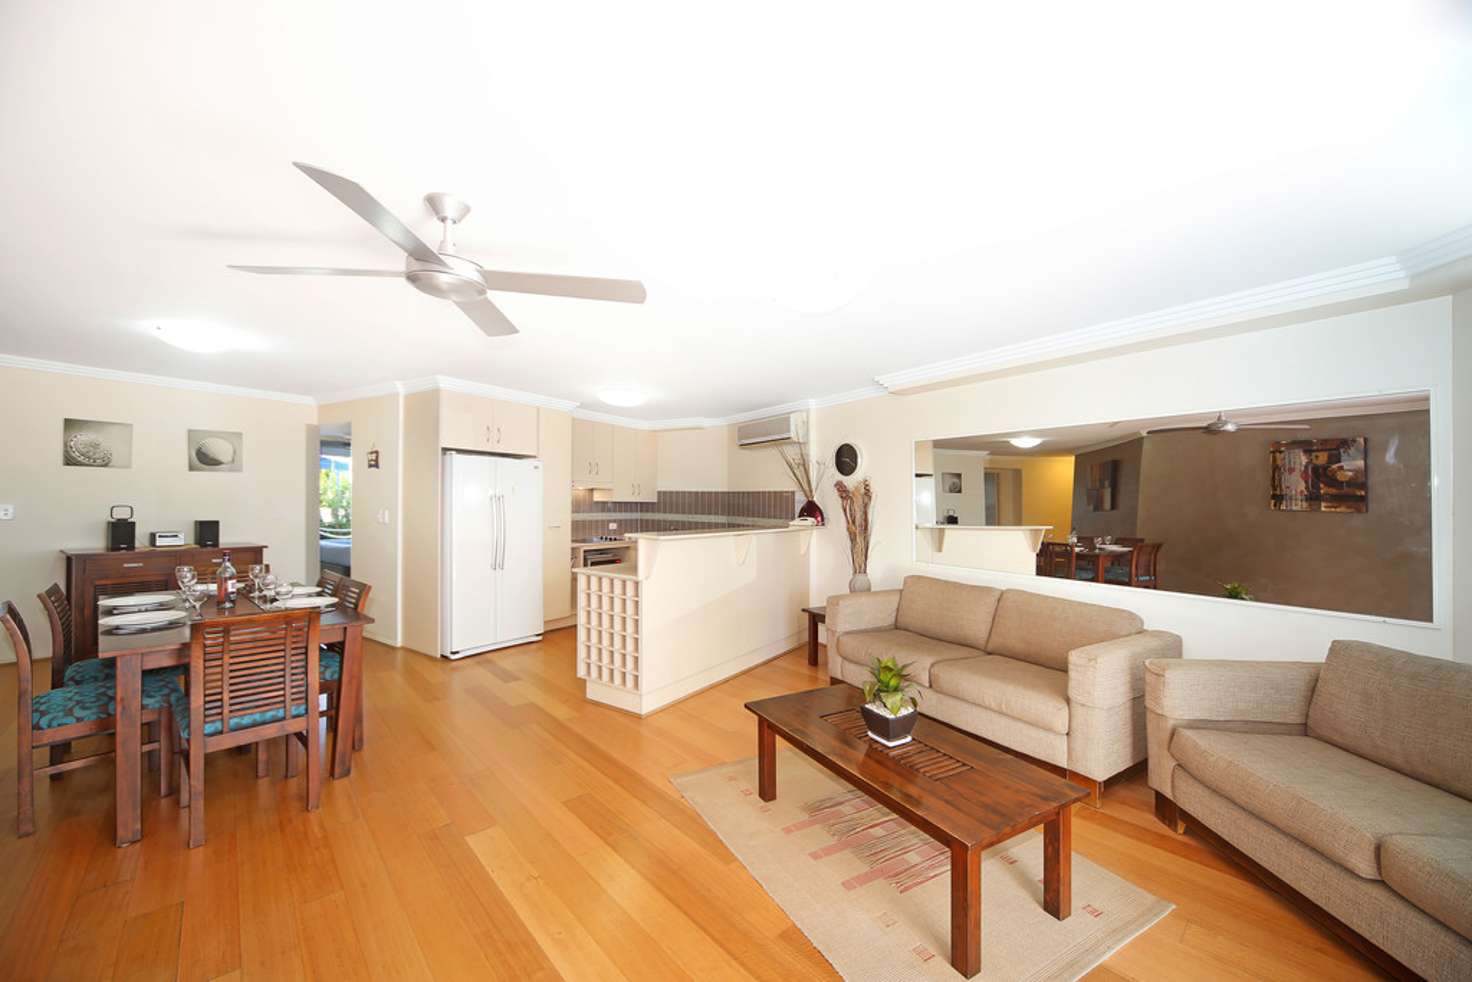 Main view of Homely unit listing, 4/38 Maloja Ave - Watermark, Caloundra QLD 4551